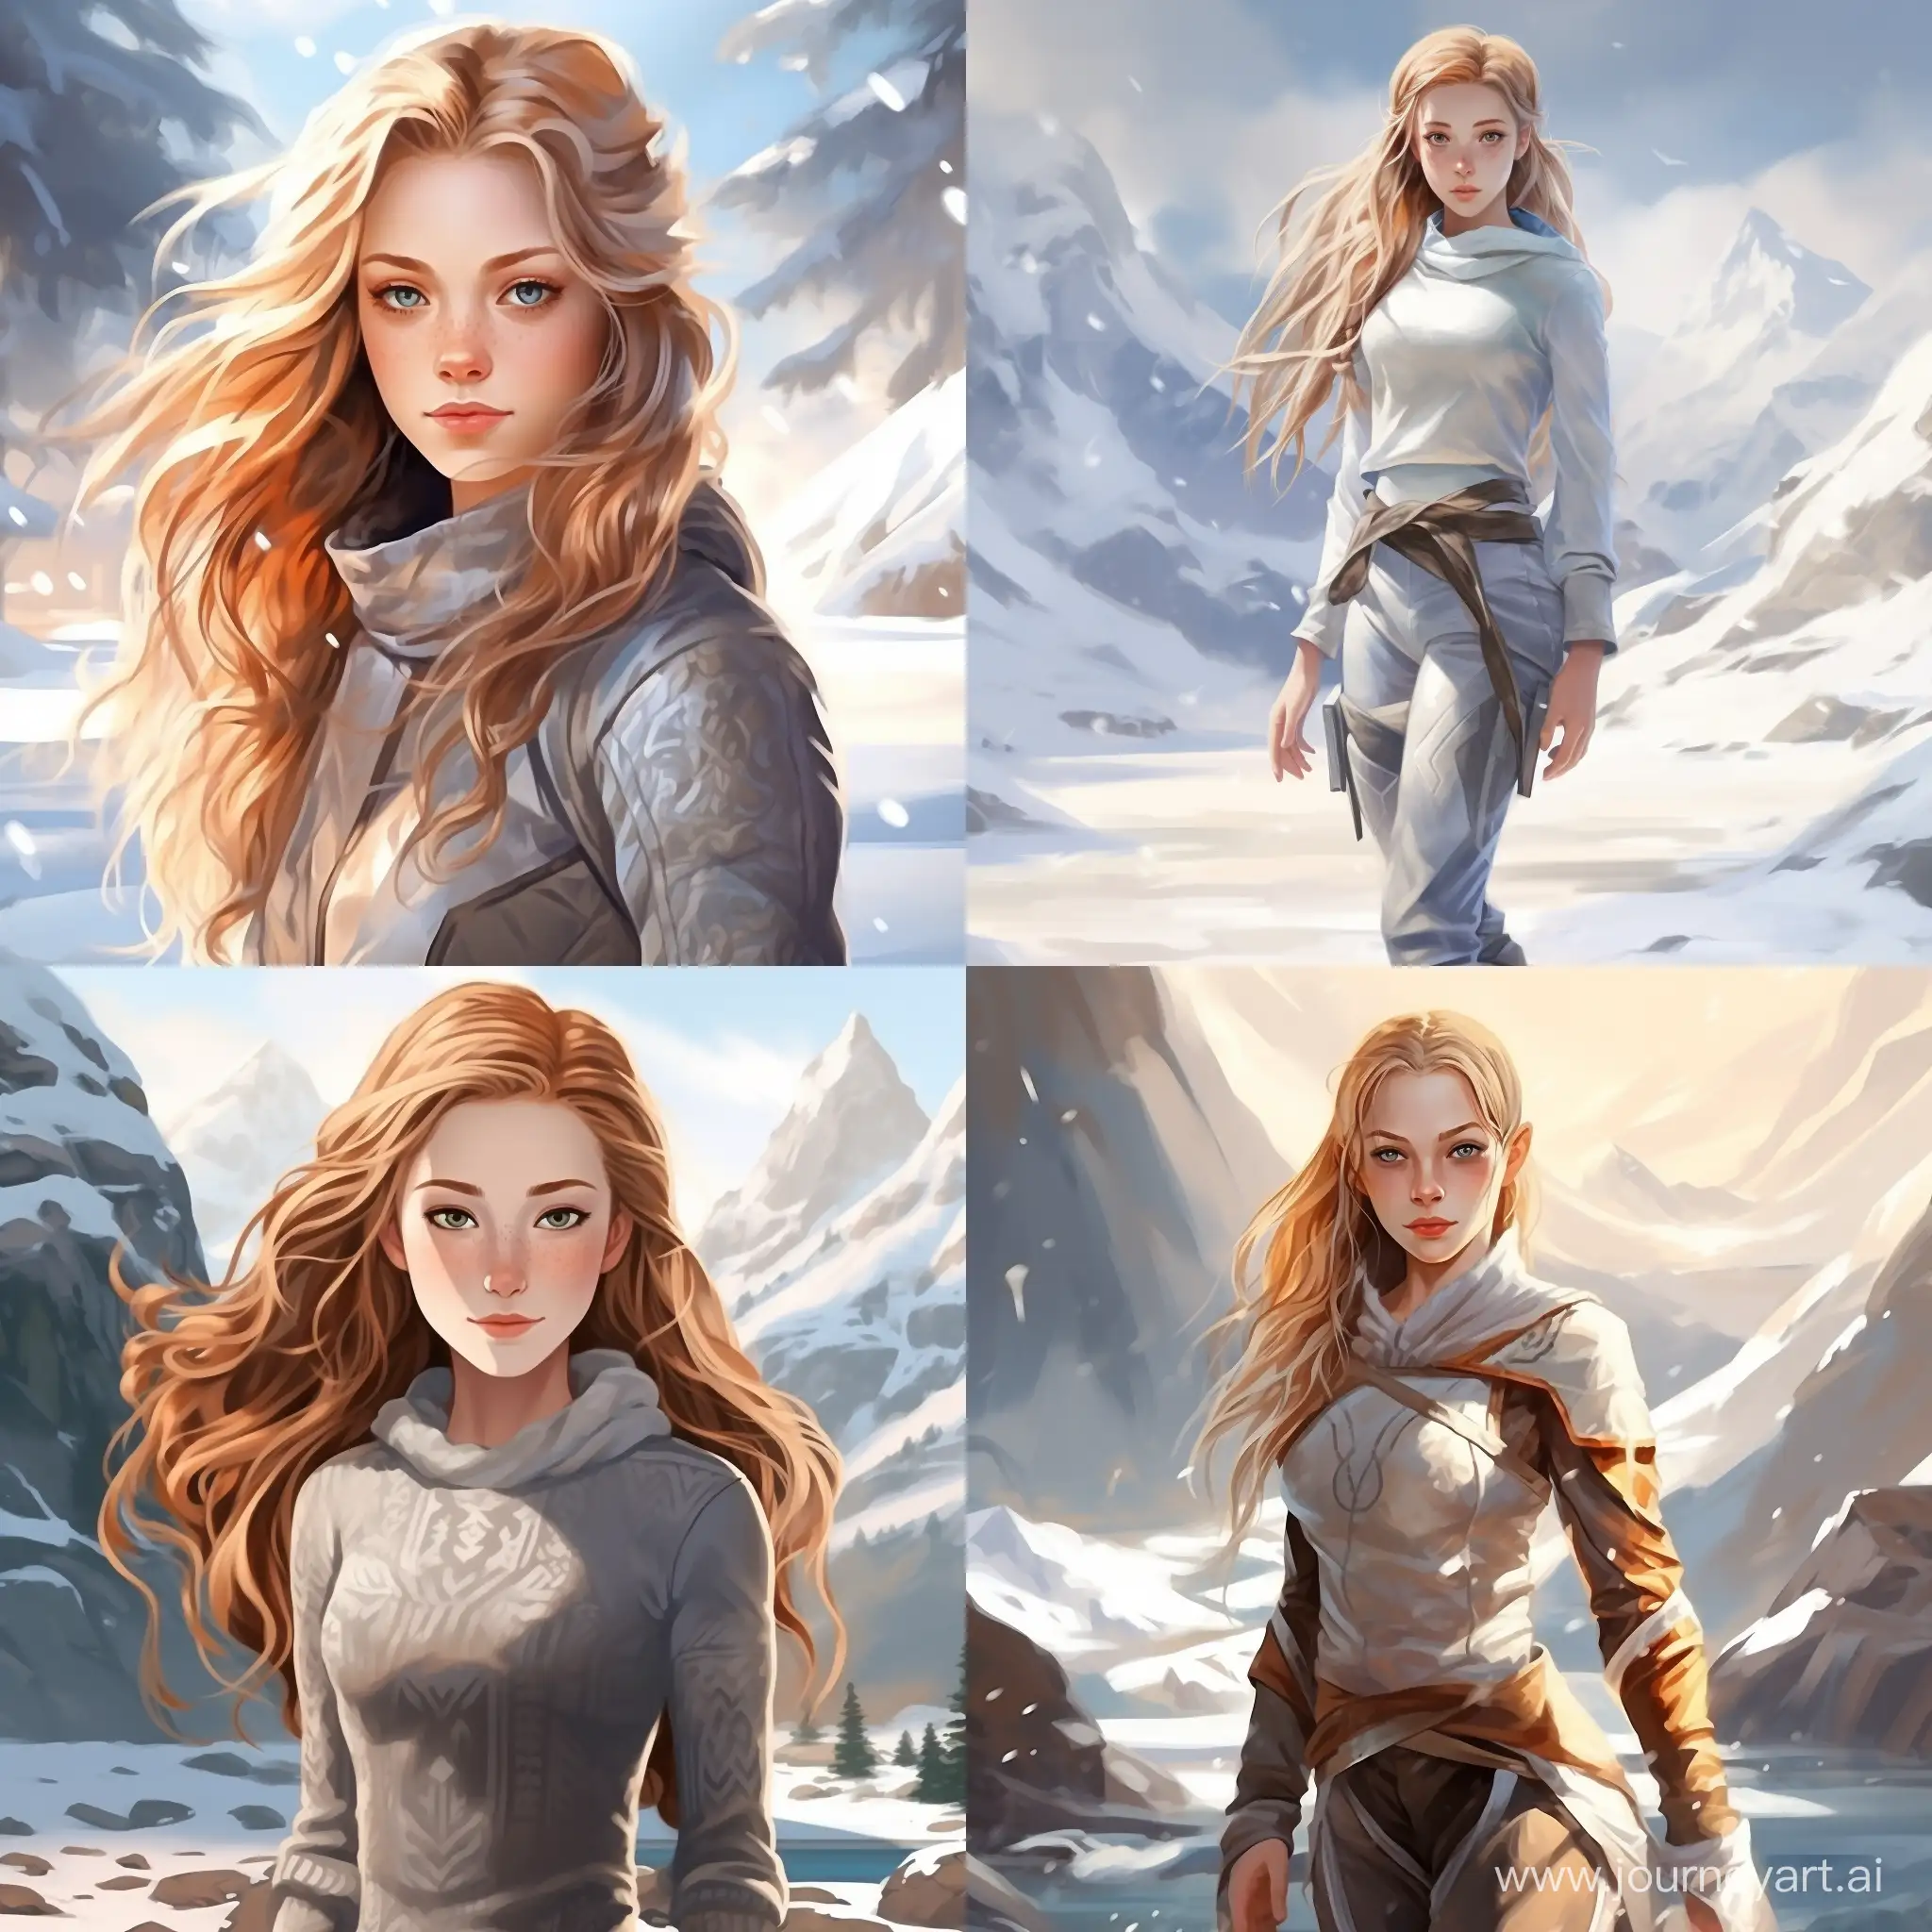 Beautiful girl, golden hair, gray-blue eyes, snow-white skin, teenager, 14 years old, in the style of avatar legend of aang, full-length, high quality, high detail, cartoon art